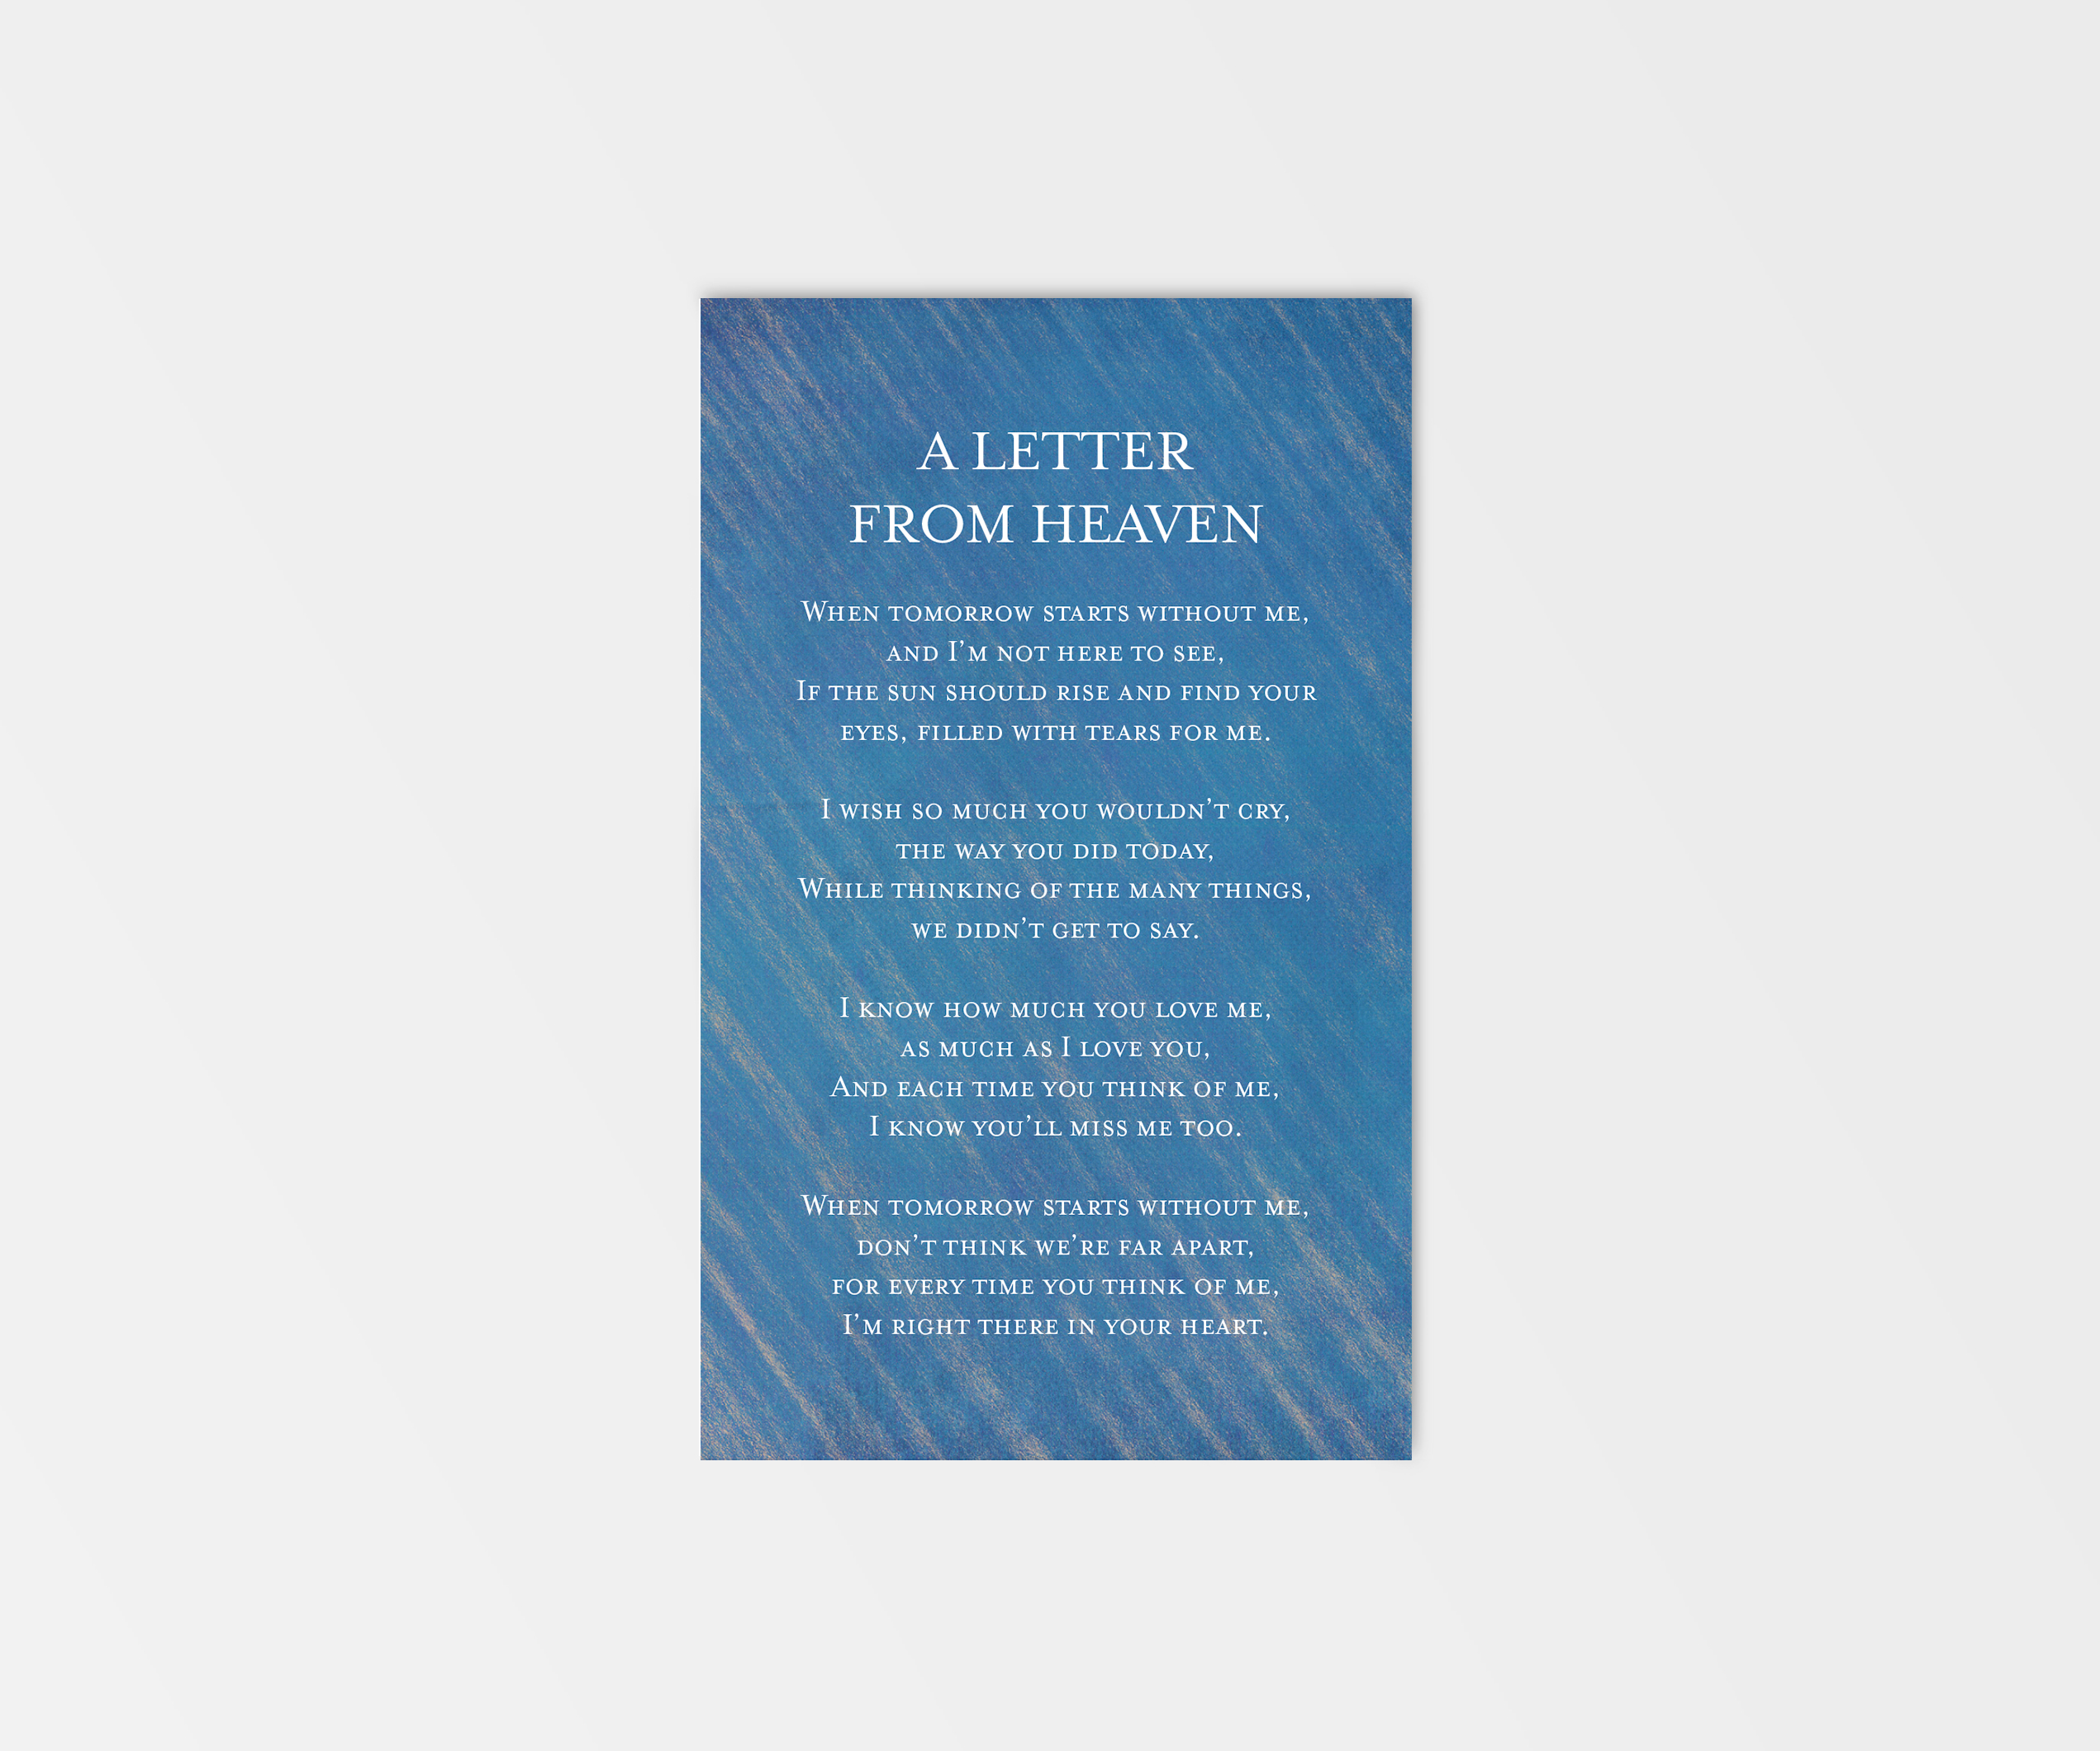 blue striped modern male funeral laminated prayer card with poem for funeral